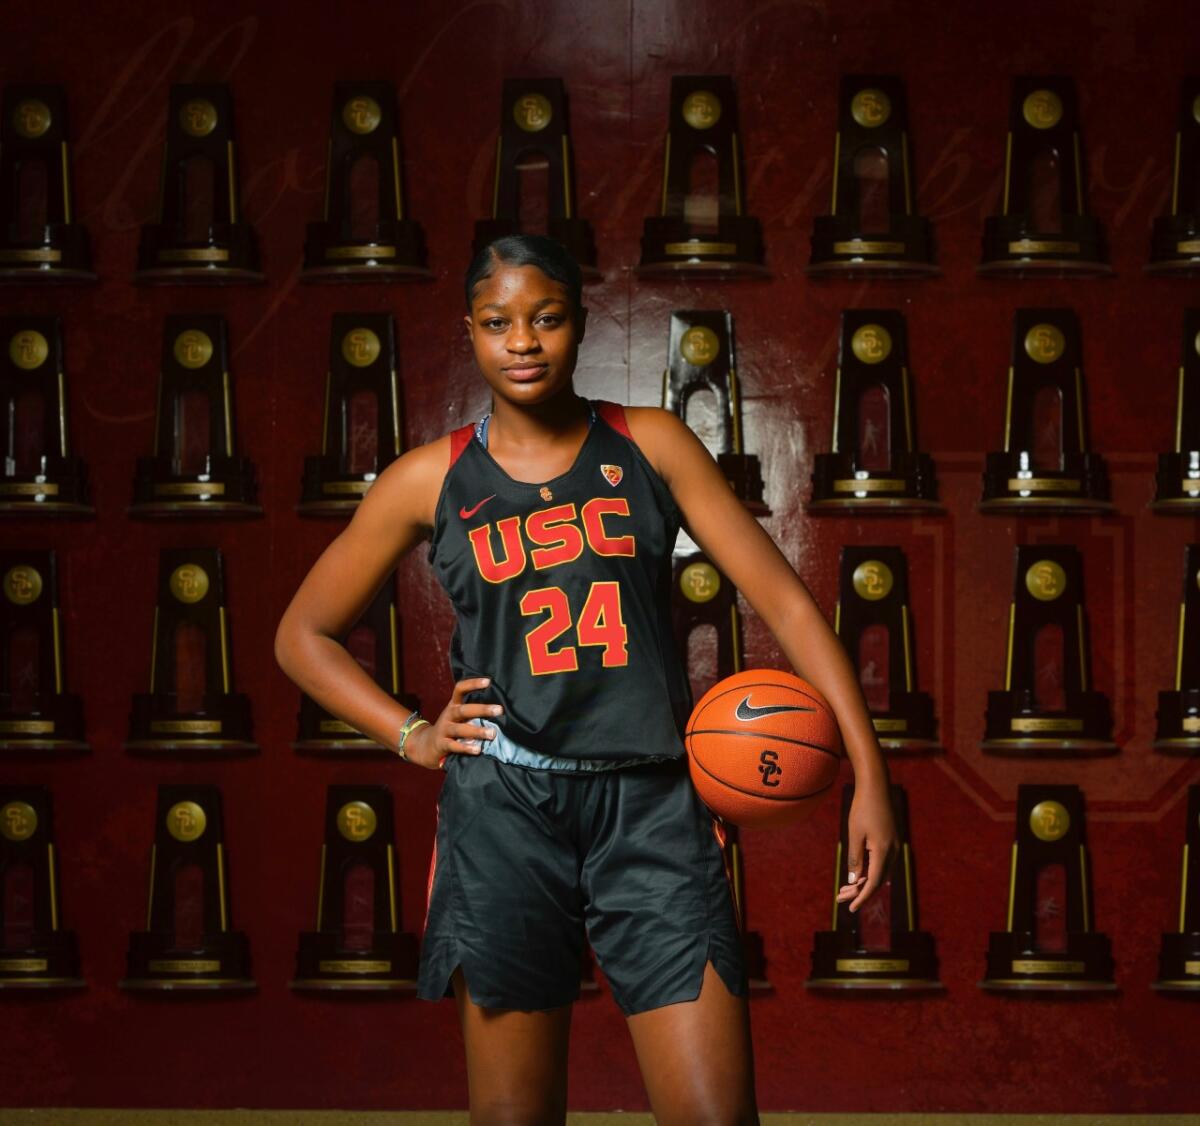 Clarice Akunwafo of Rolling Hills Prep, a USC signee, was named a McDonald's All-American.